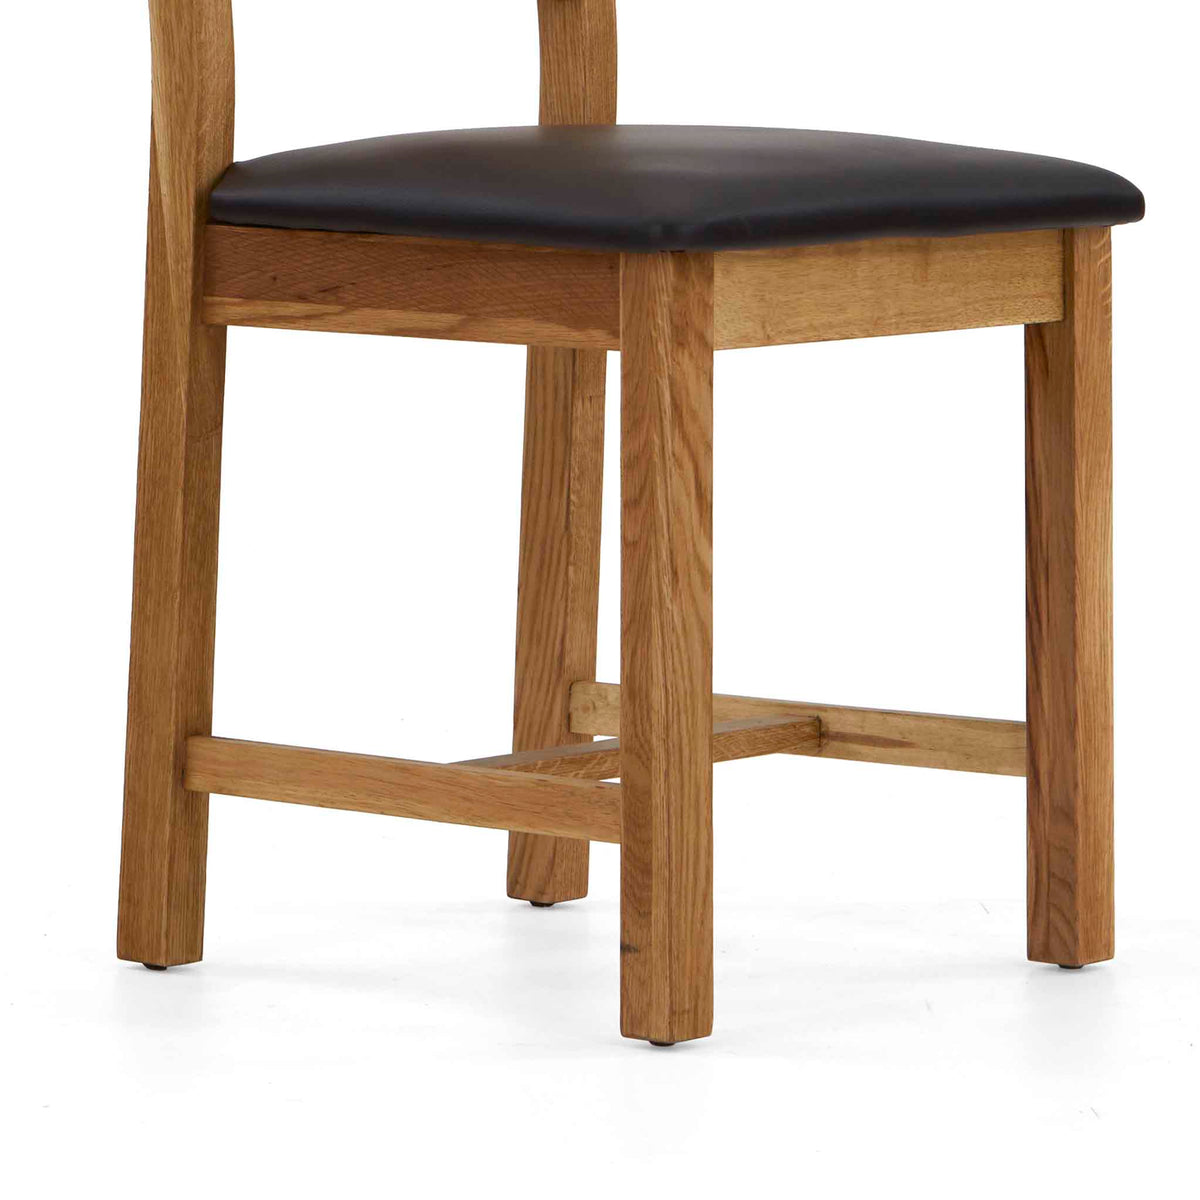 Zelah Oak Cross-Back Dining Chair - Close up of seat and legs